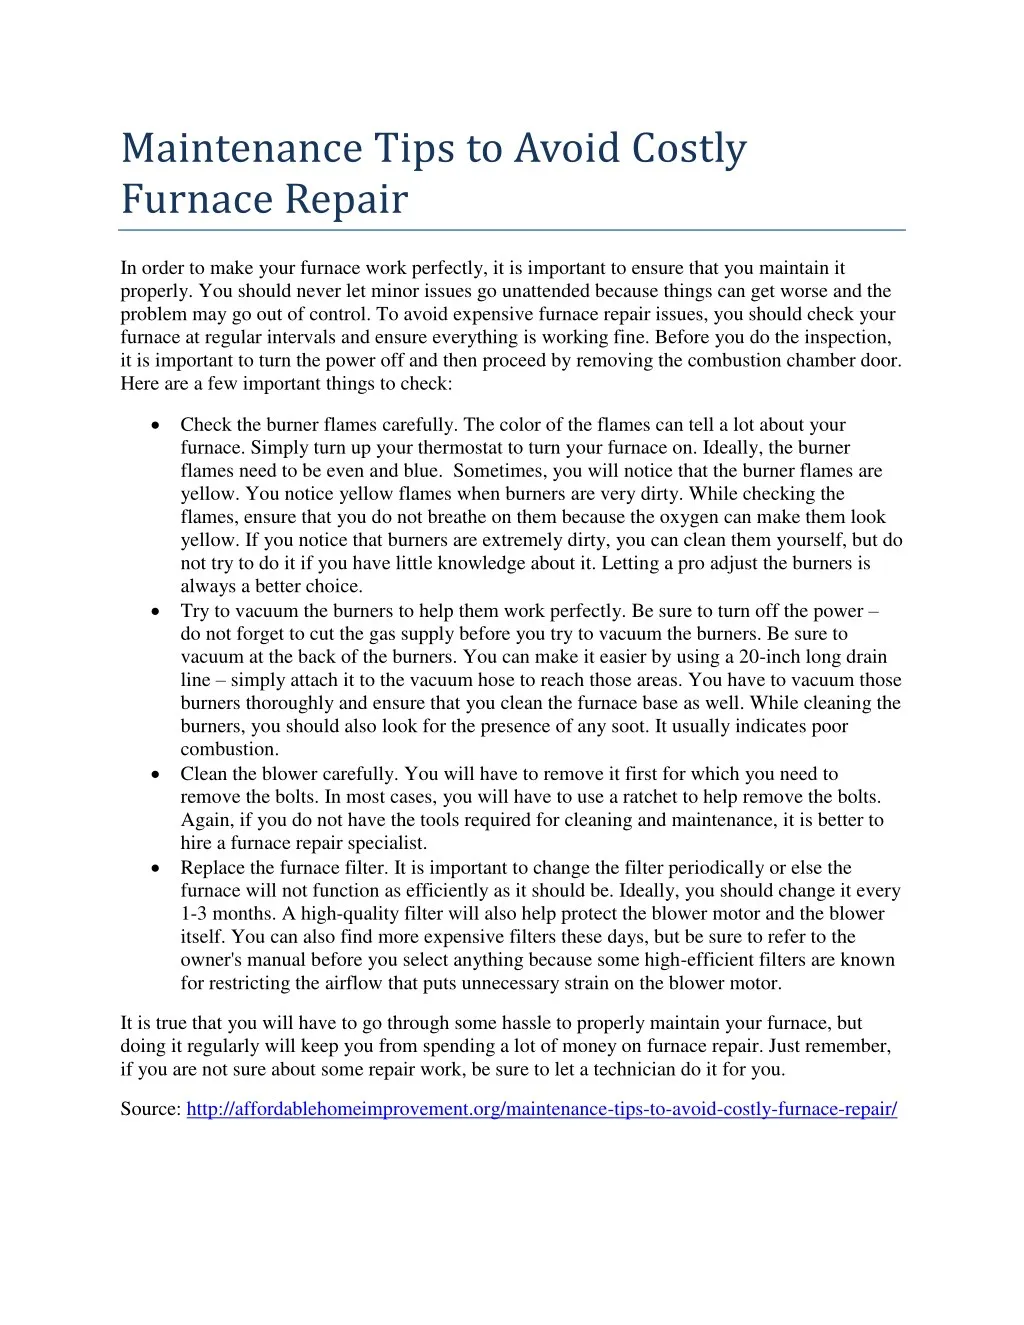 maintenance tips to avoid costly furnace repair